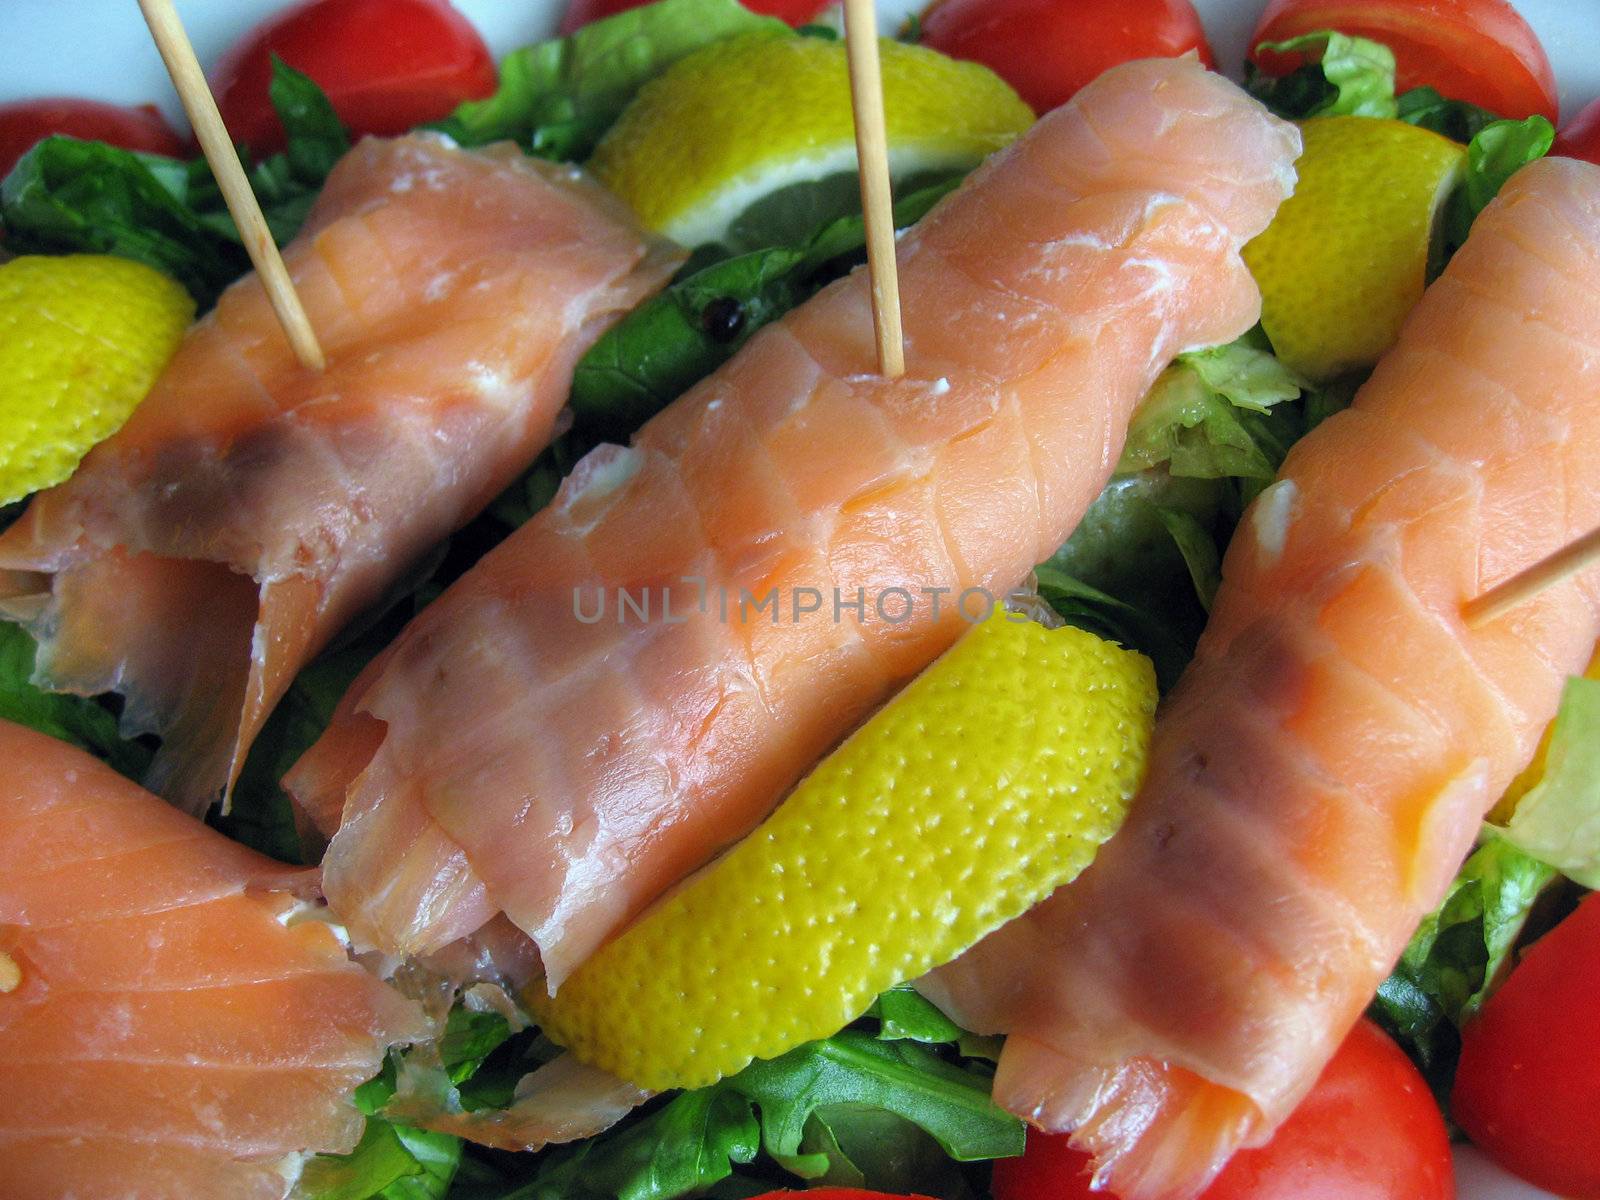 Salmon and Lemon with Tomatoes, a typical Appetizer in Tuscany